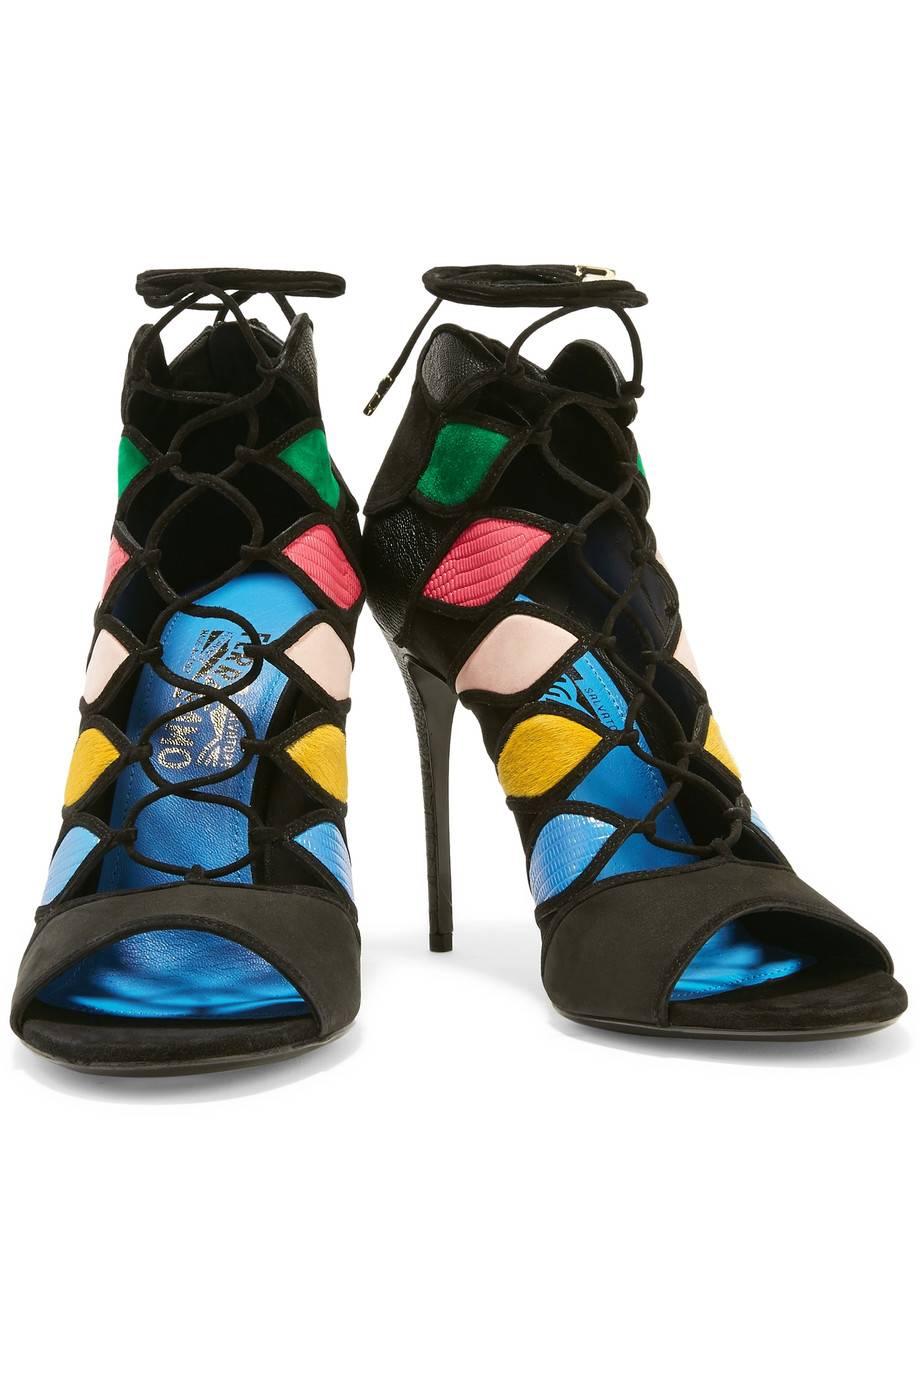 Salvatore Ferragamo New Black Multi Gladiator Evening Heels Booties in Box 

Size IT 36 - Not your size?  Message us for help finding yours.
Suede
Leather
Tie and zip closures
Made in Italy
Heel height 4.5"
Includes original Salvatore Ferragamo